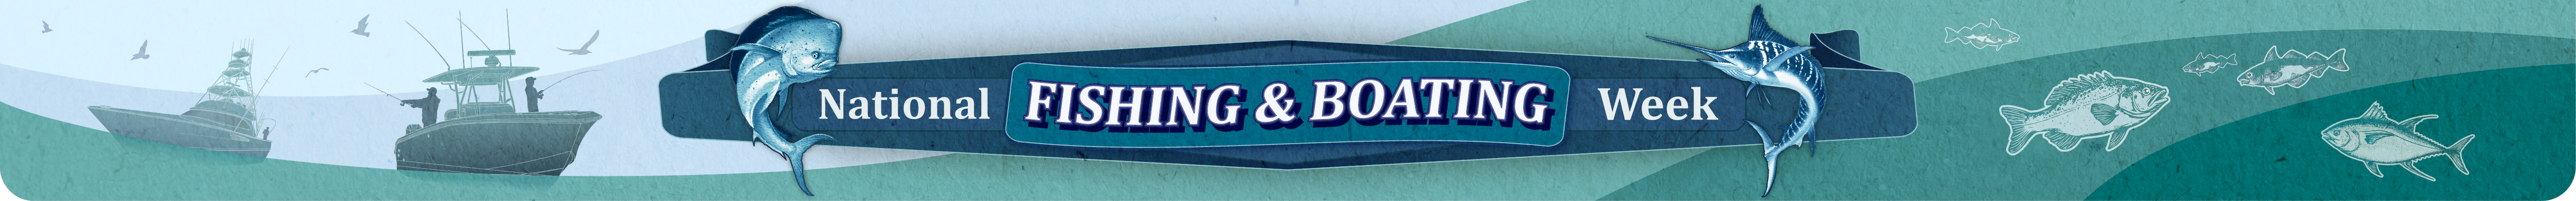 Website banner for National Fishing and Boating Week